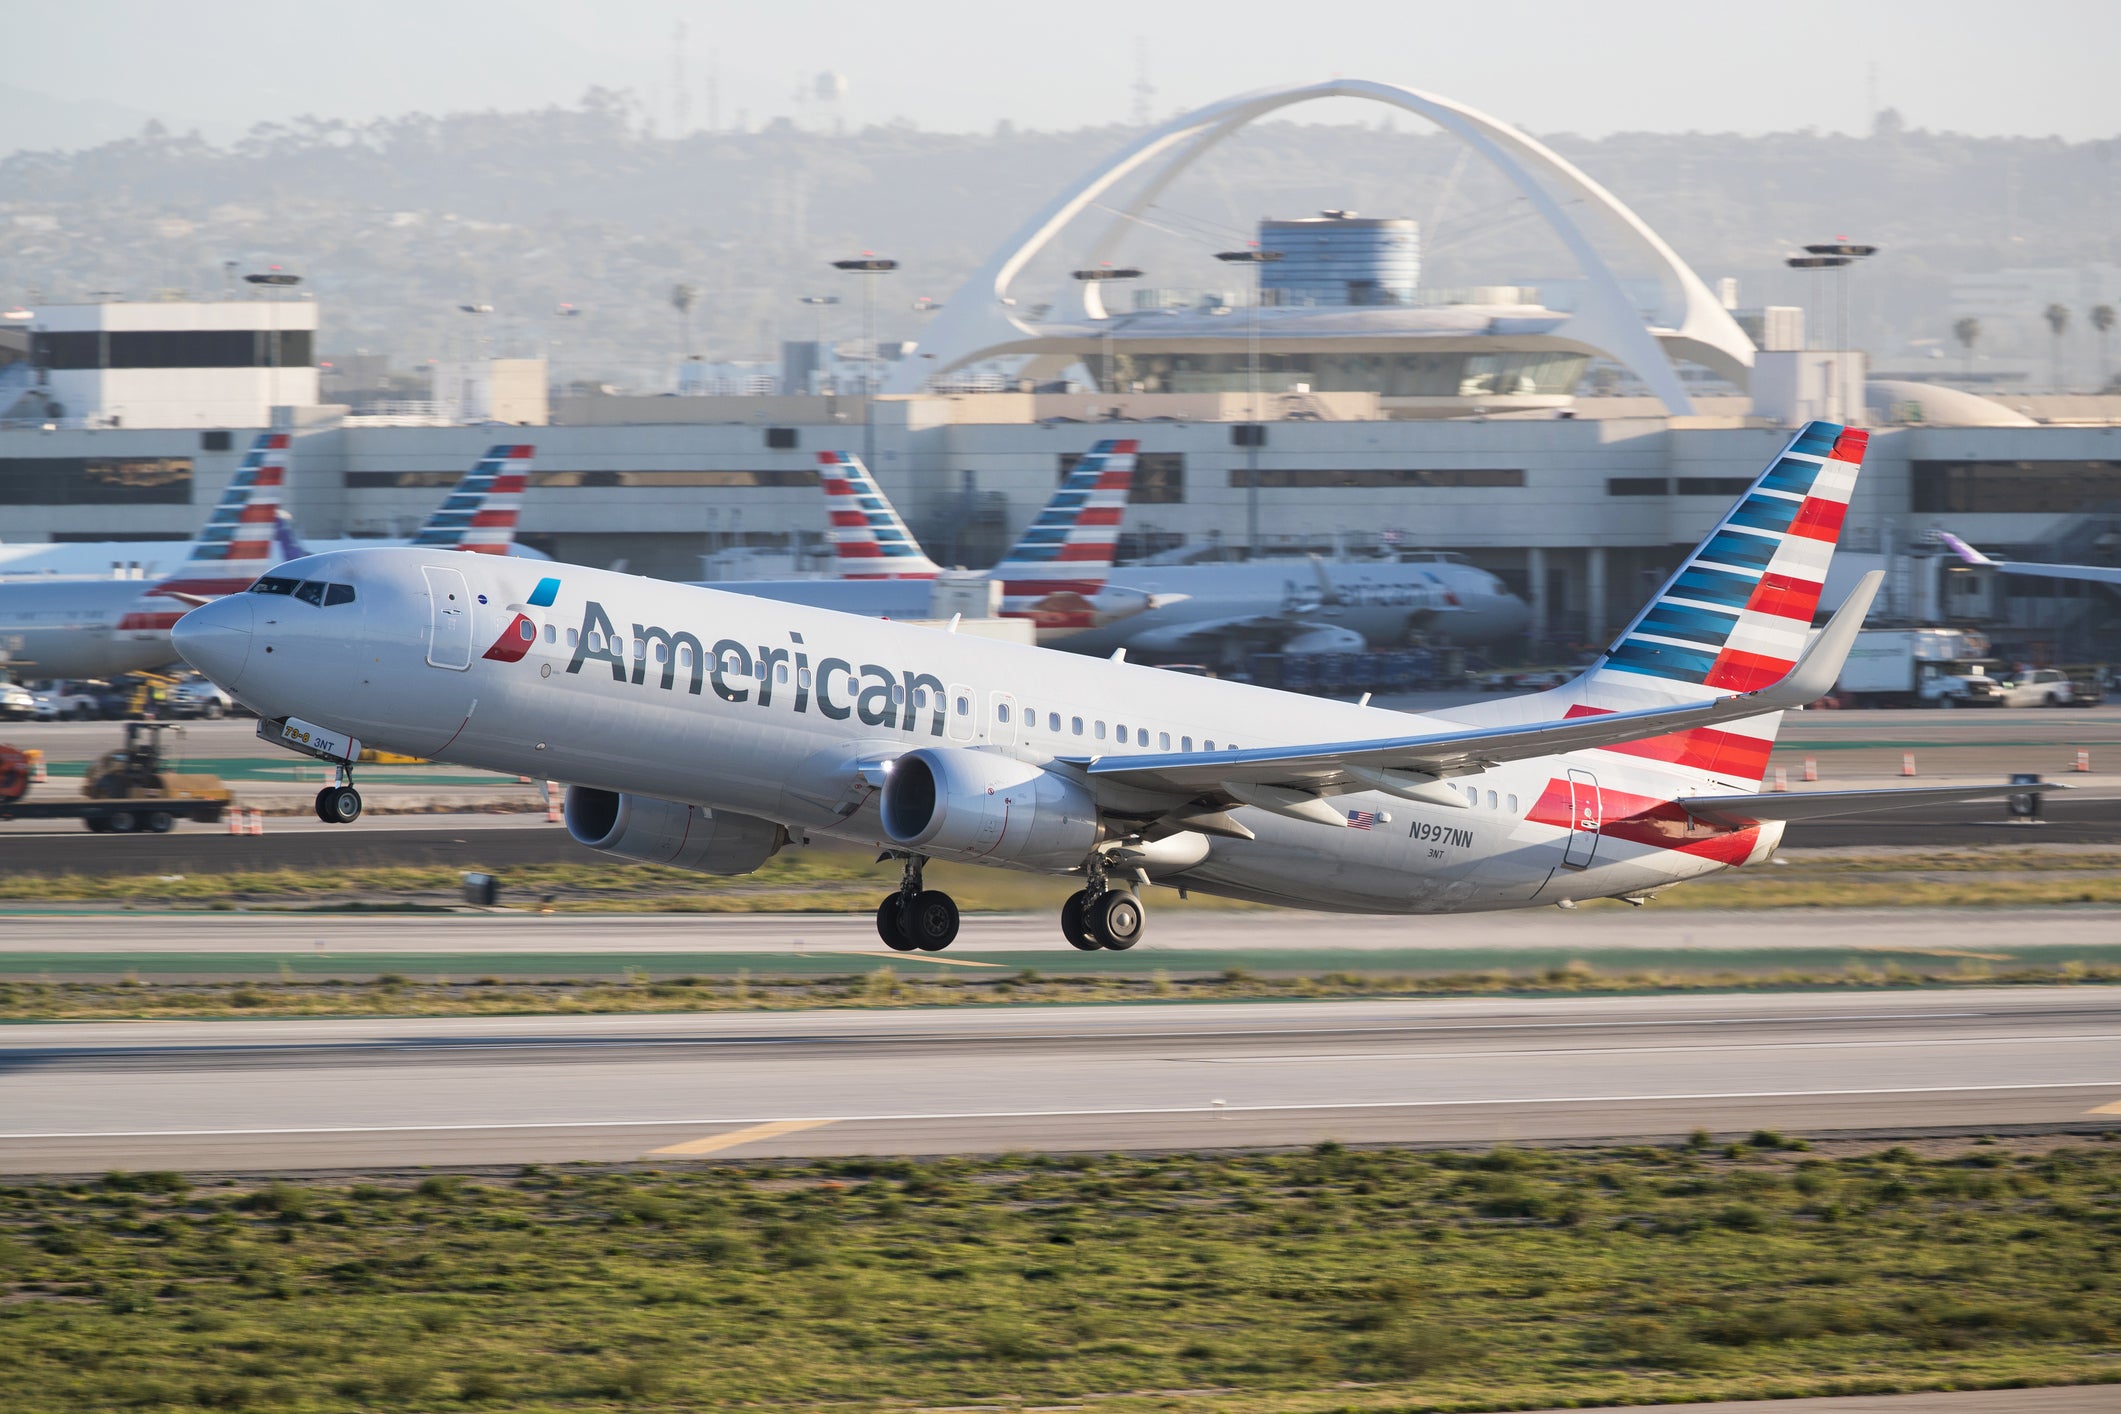 An American Airlines Boeing 737 departing Los Angeles International Airport. An American Airlines Airbus plane departing from the San Francisco International Airport had to be evacuated on July 12 after a fire broke out inside the plane’s cabin (stock image)